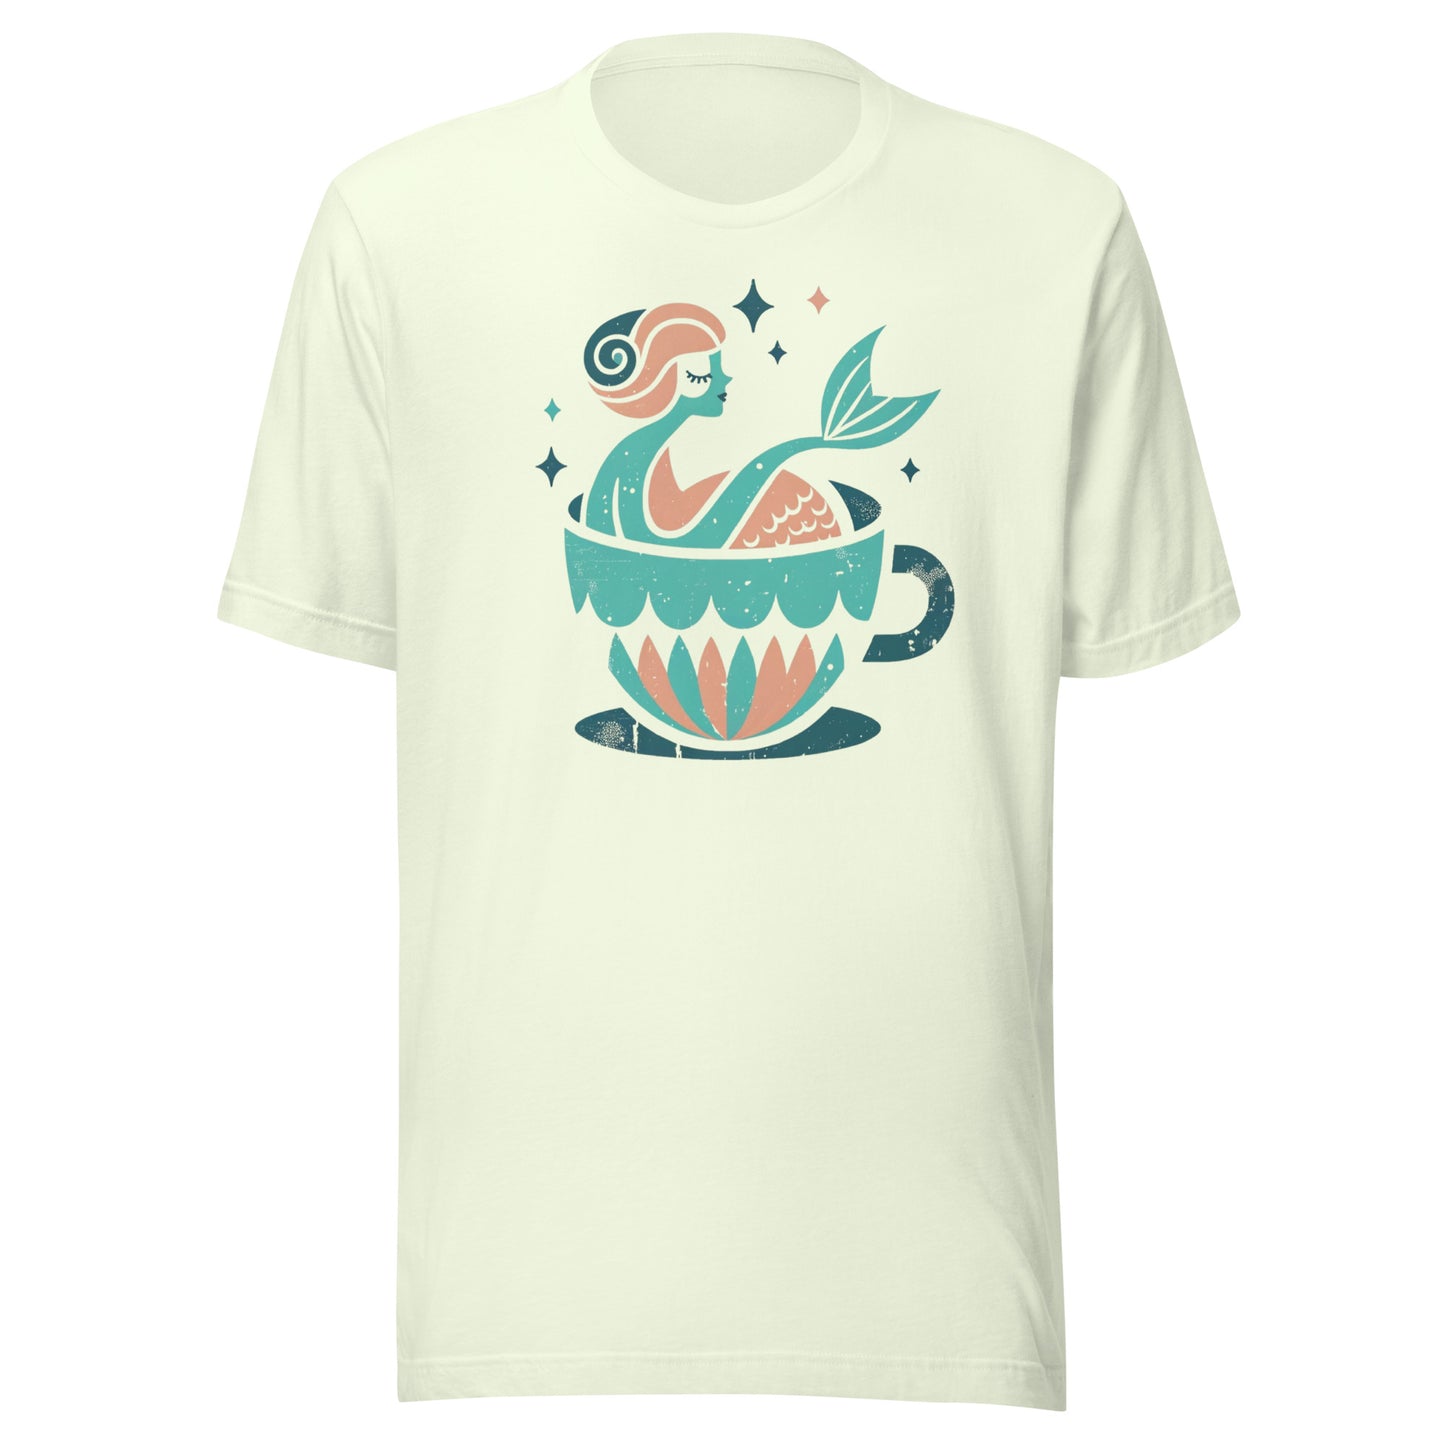 Mermaid in a Cup - Retro-Inspired Unisex Tee in Green & Pink